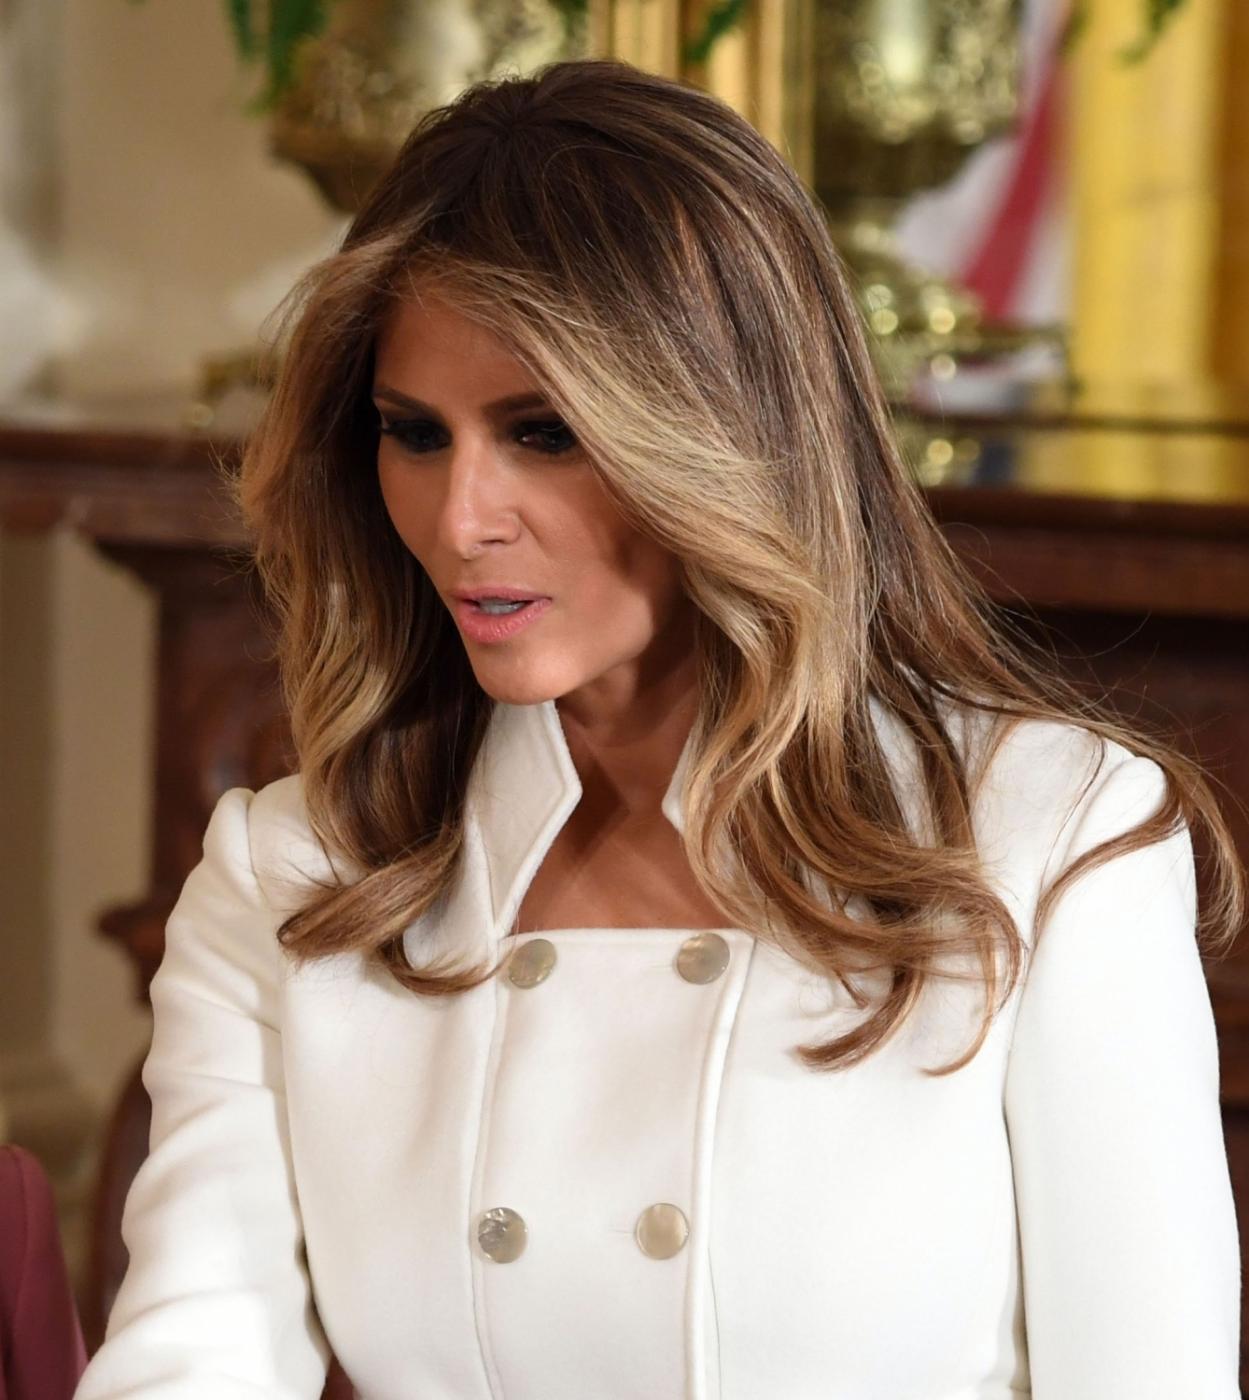 US First Lady Melania Trump. (File Photo: IANS) by IANS_ARCH.